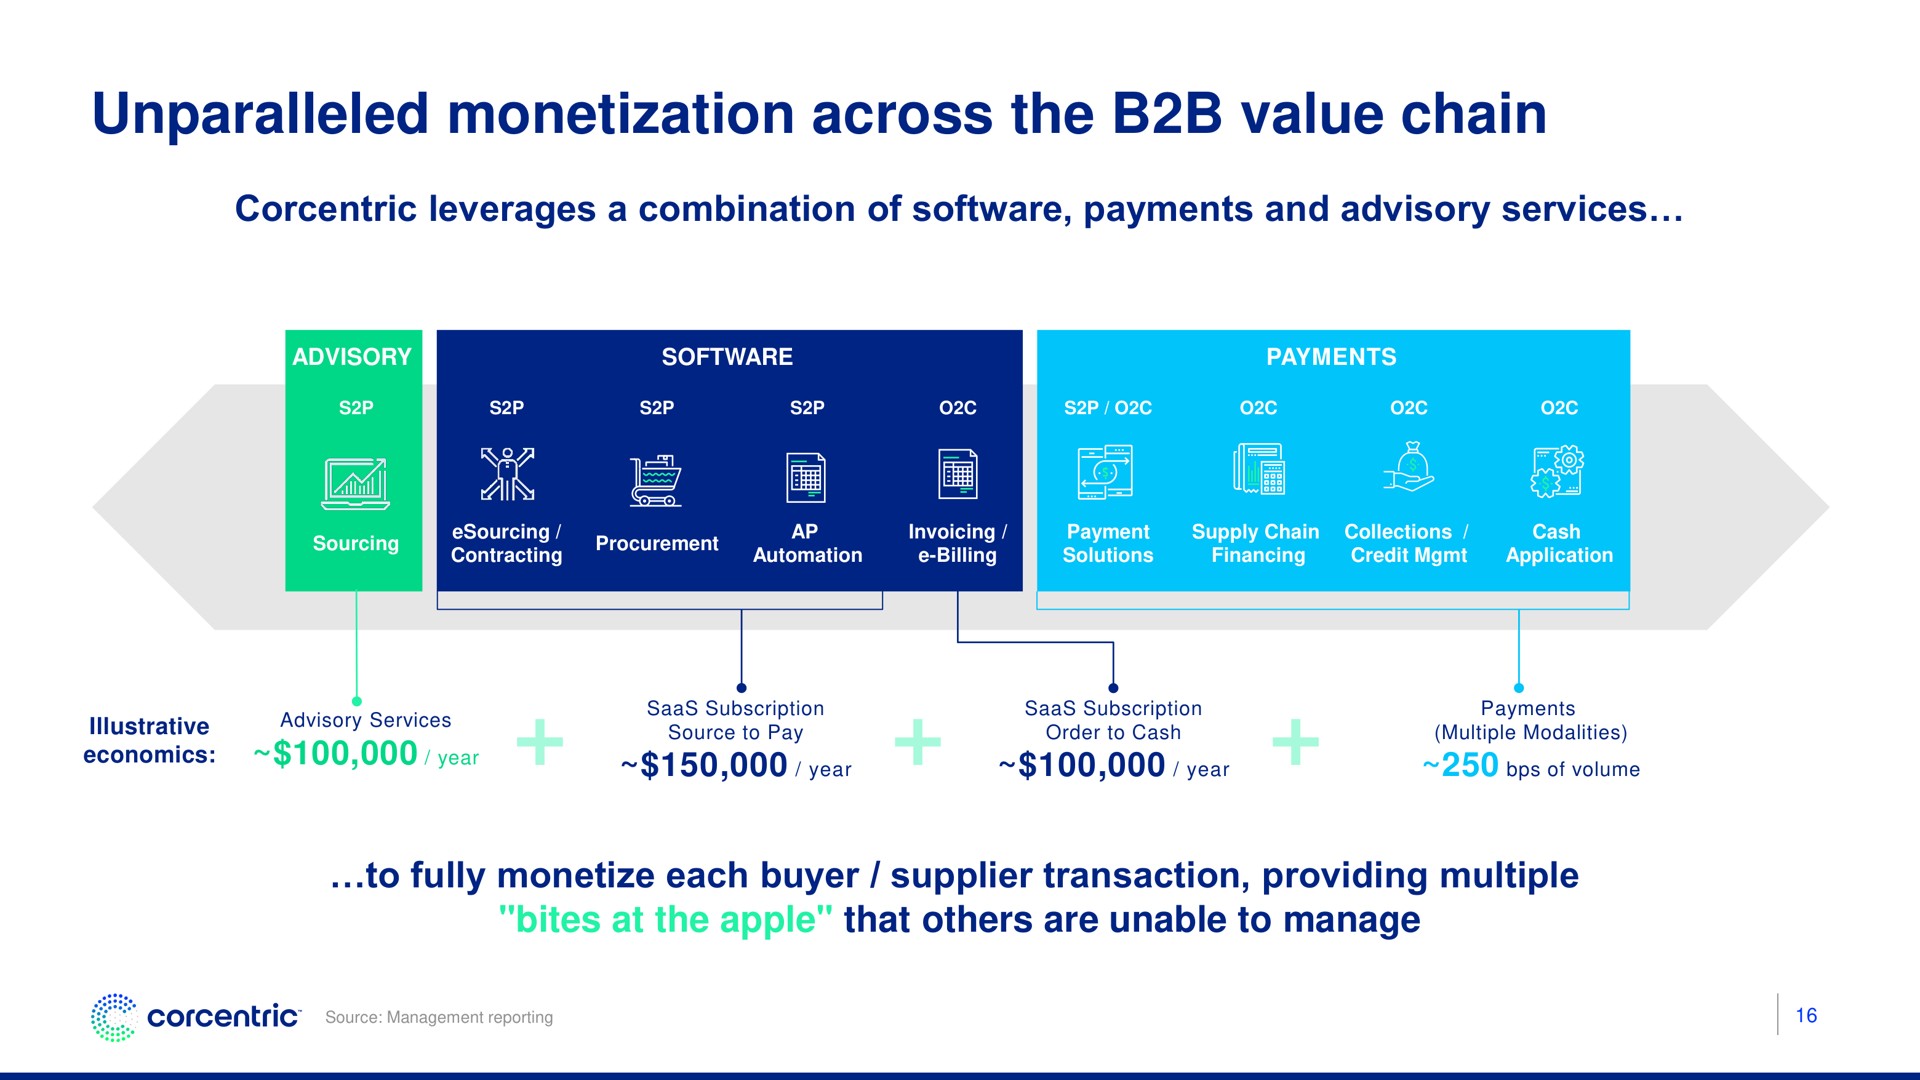 unparalleled monetization across the value chain key | Corecentric